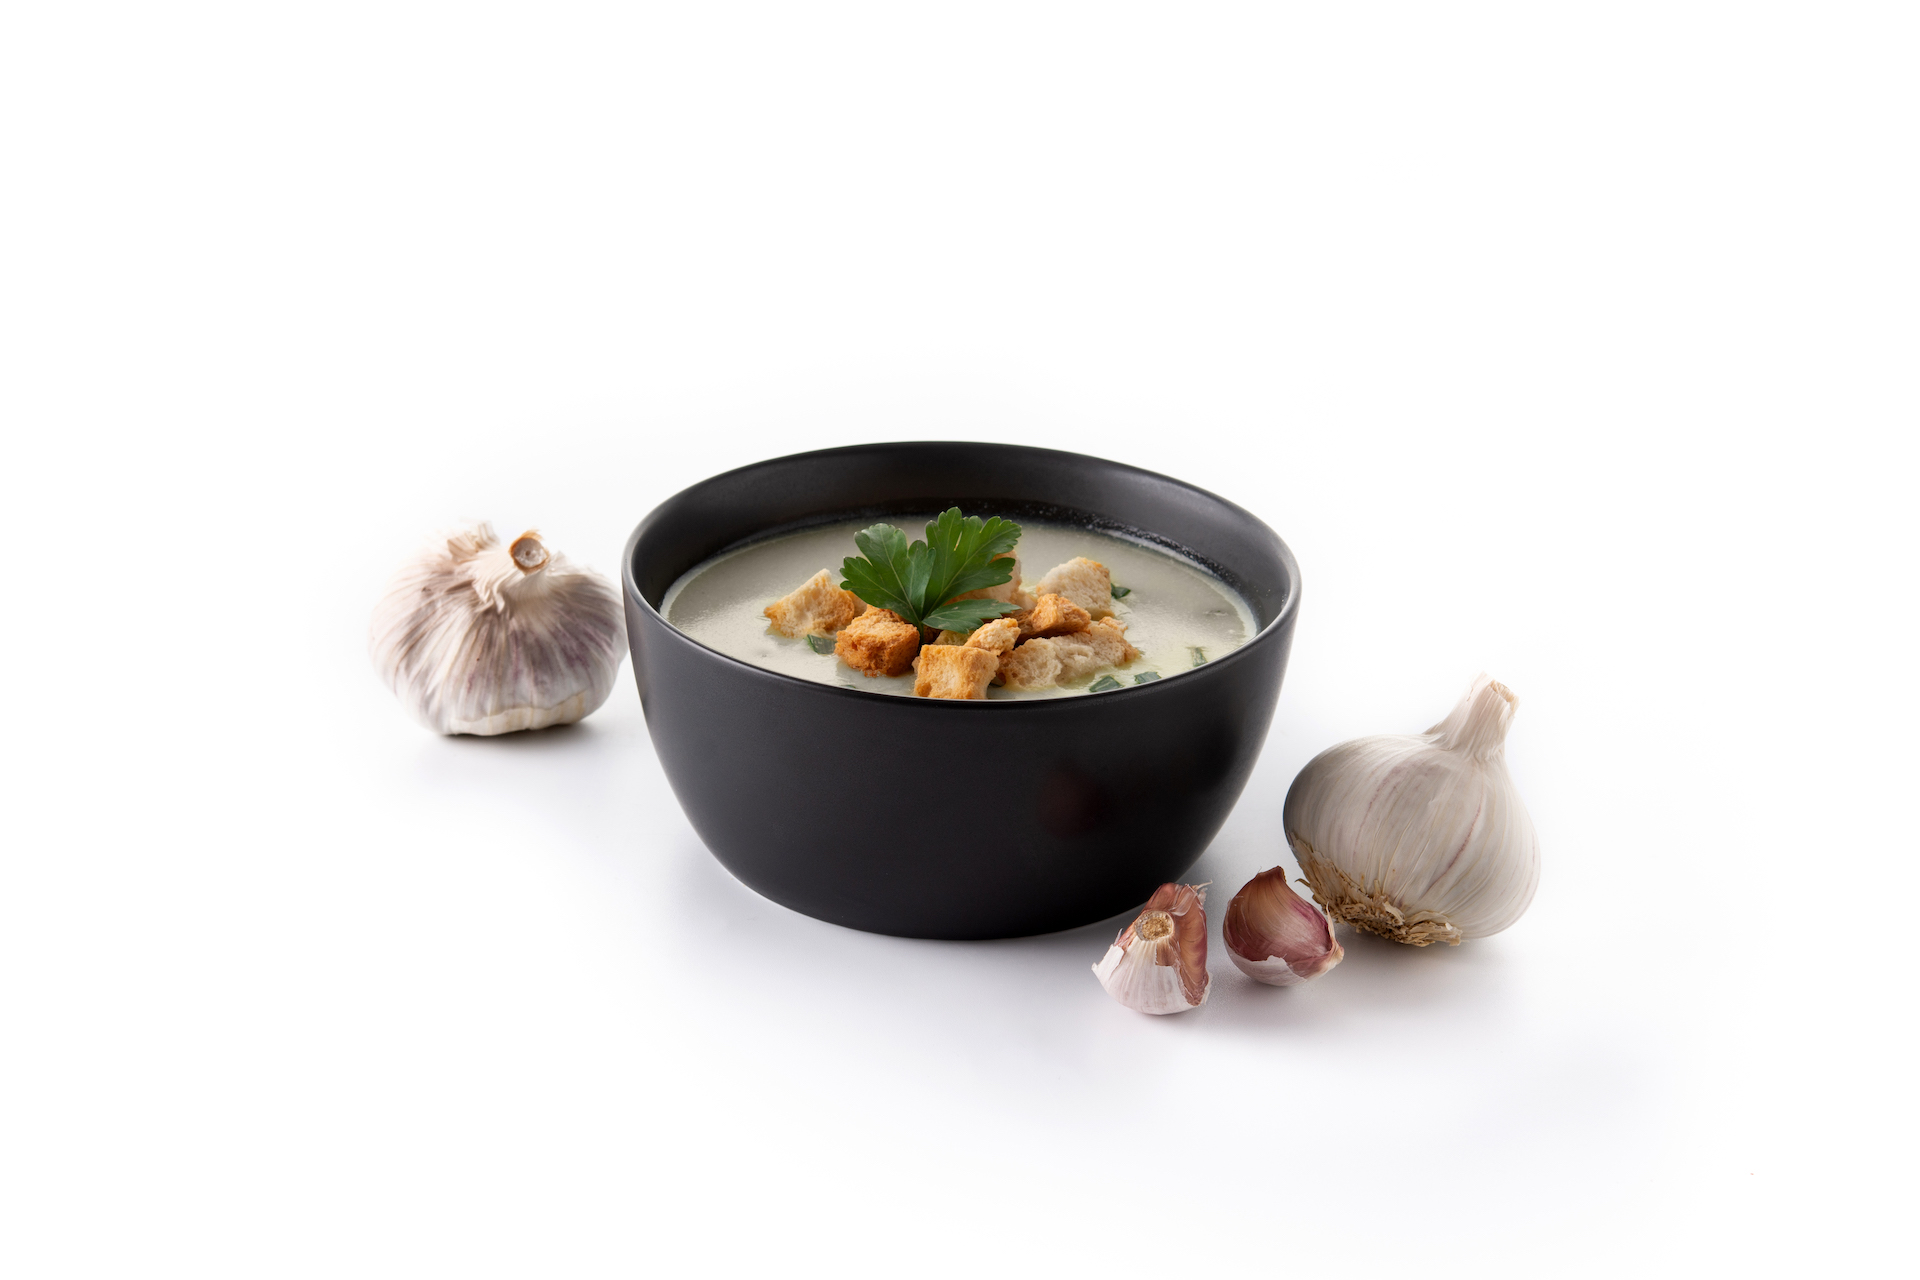 garlic-soup-topped-with-croutons-black-bowl-isolated-white-background